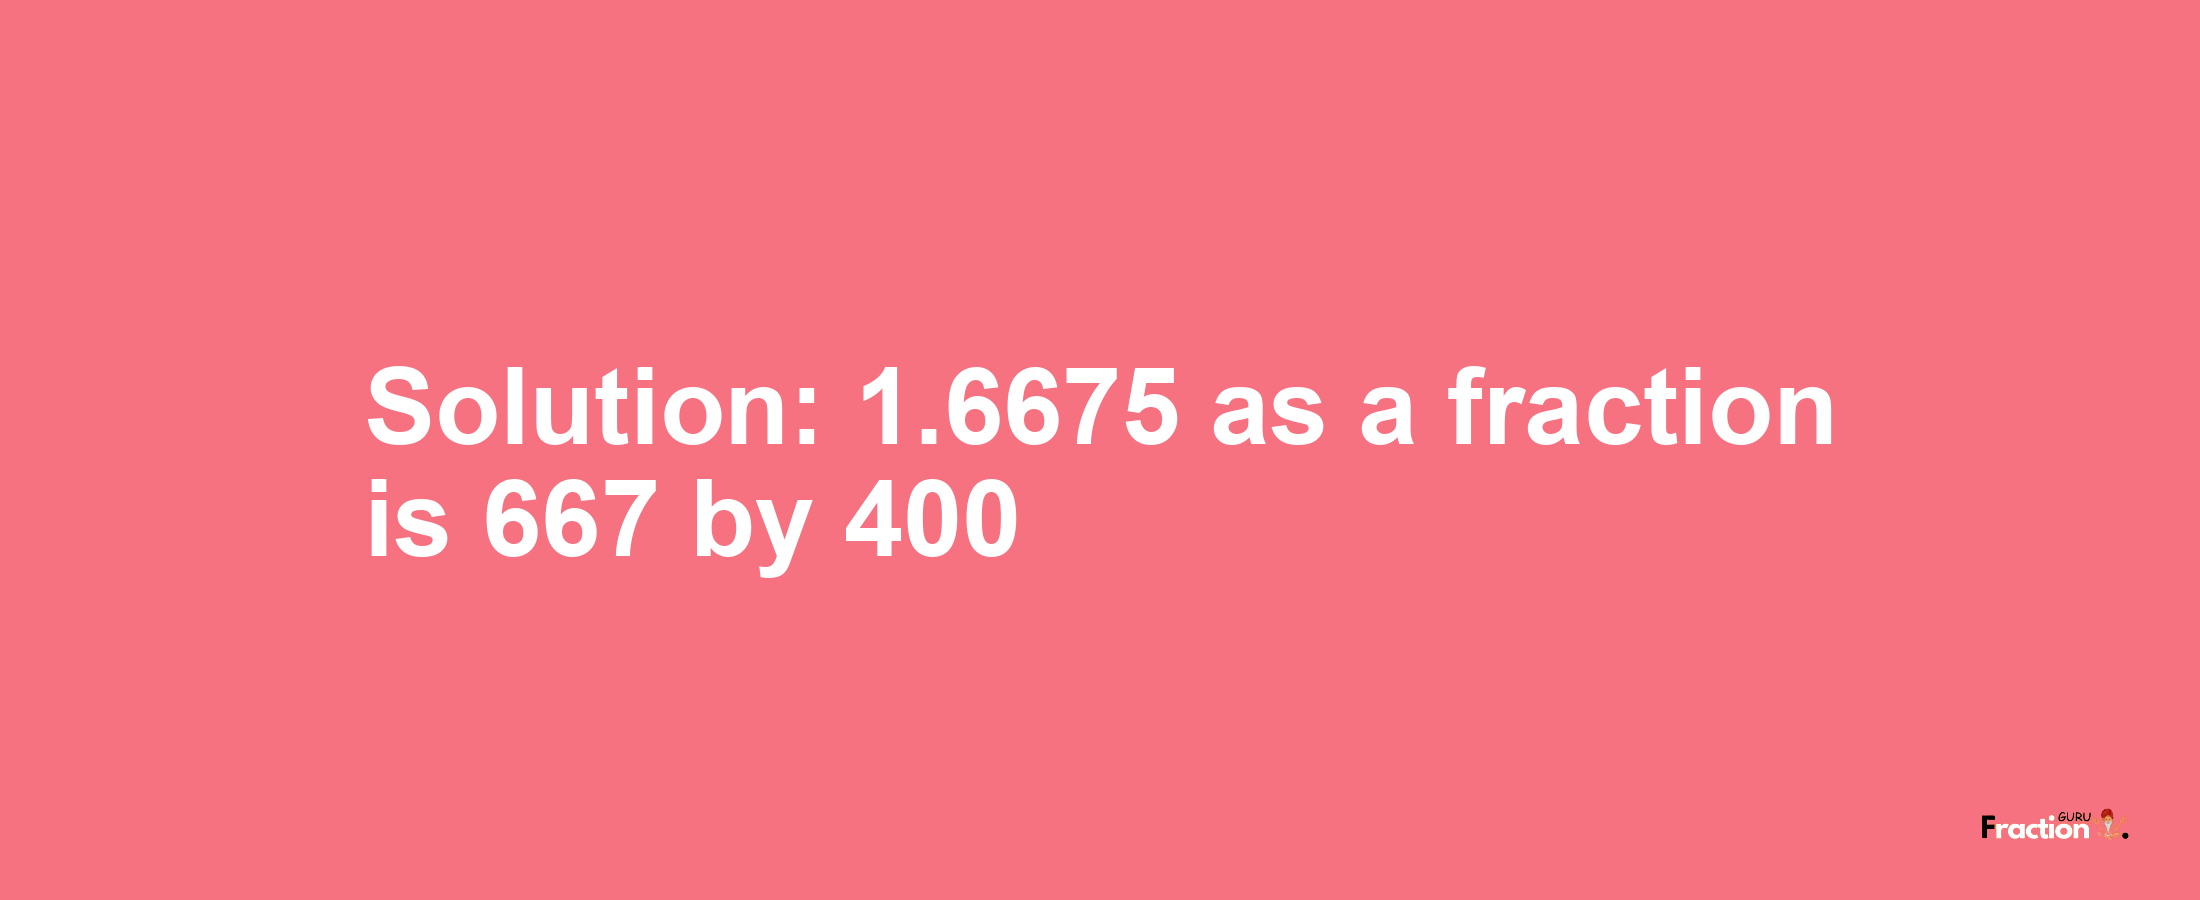 Solution:1.6675 as a fraction is 667/400